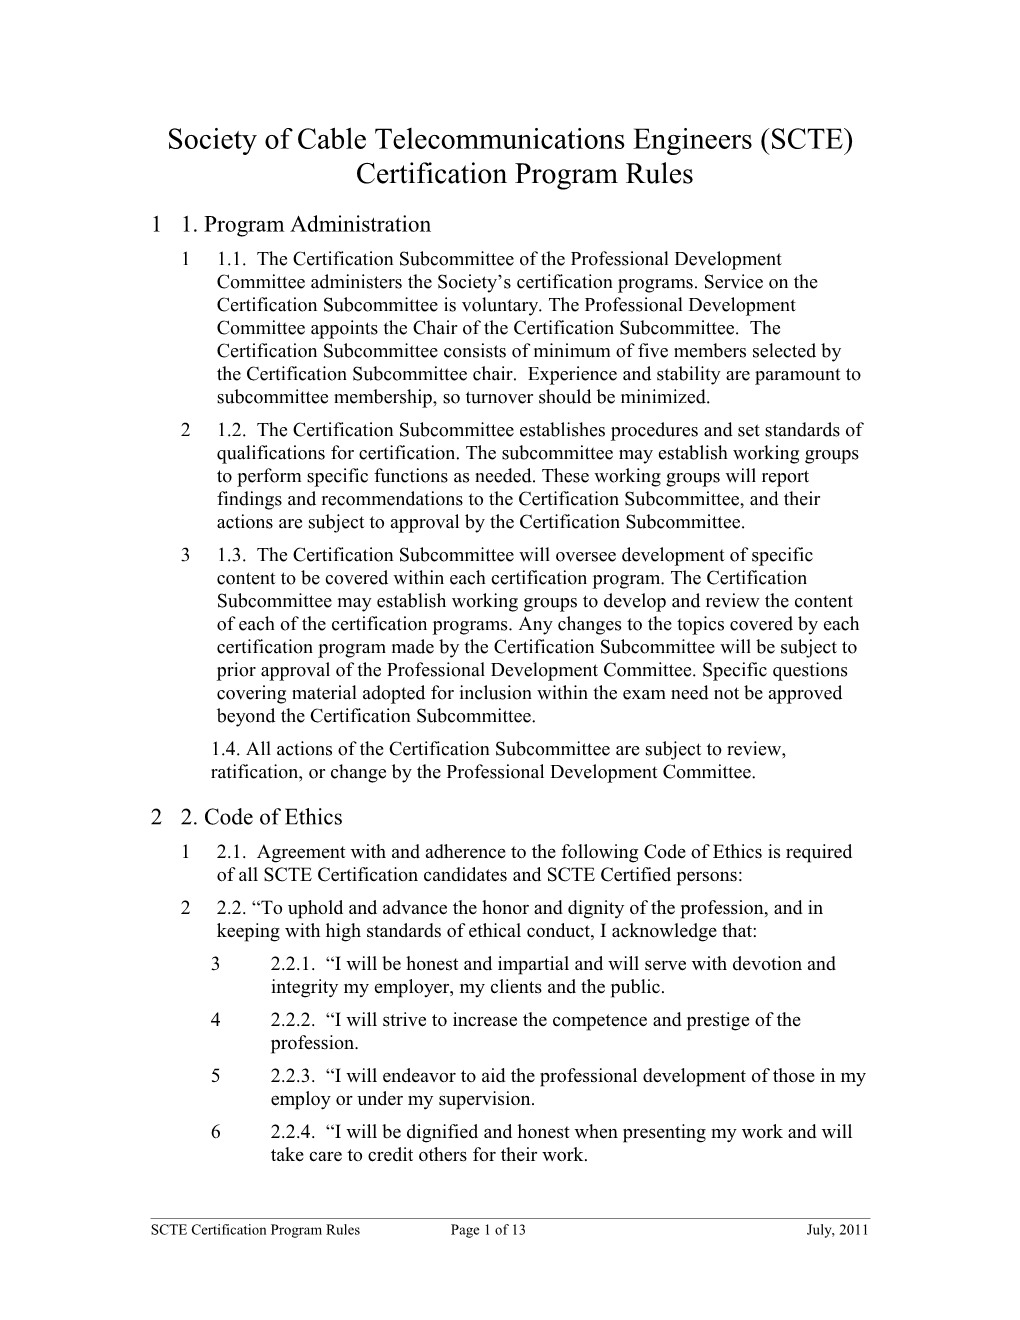 Society of Cable Telecommunications Engineers (SCTE)Certification Program Rules